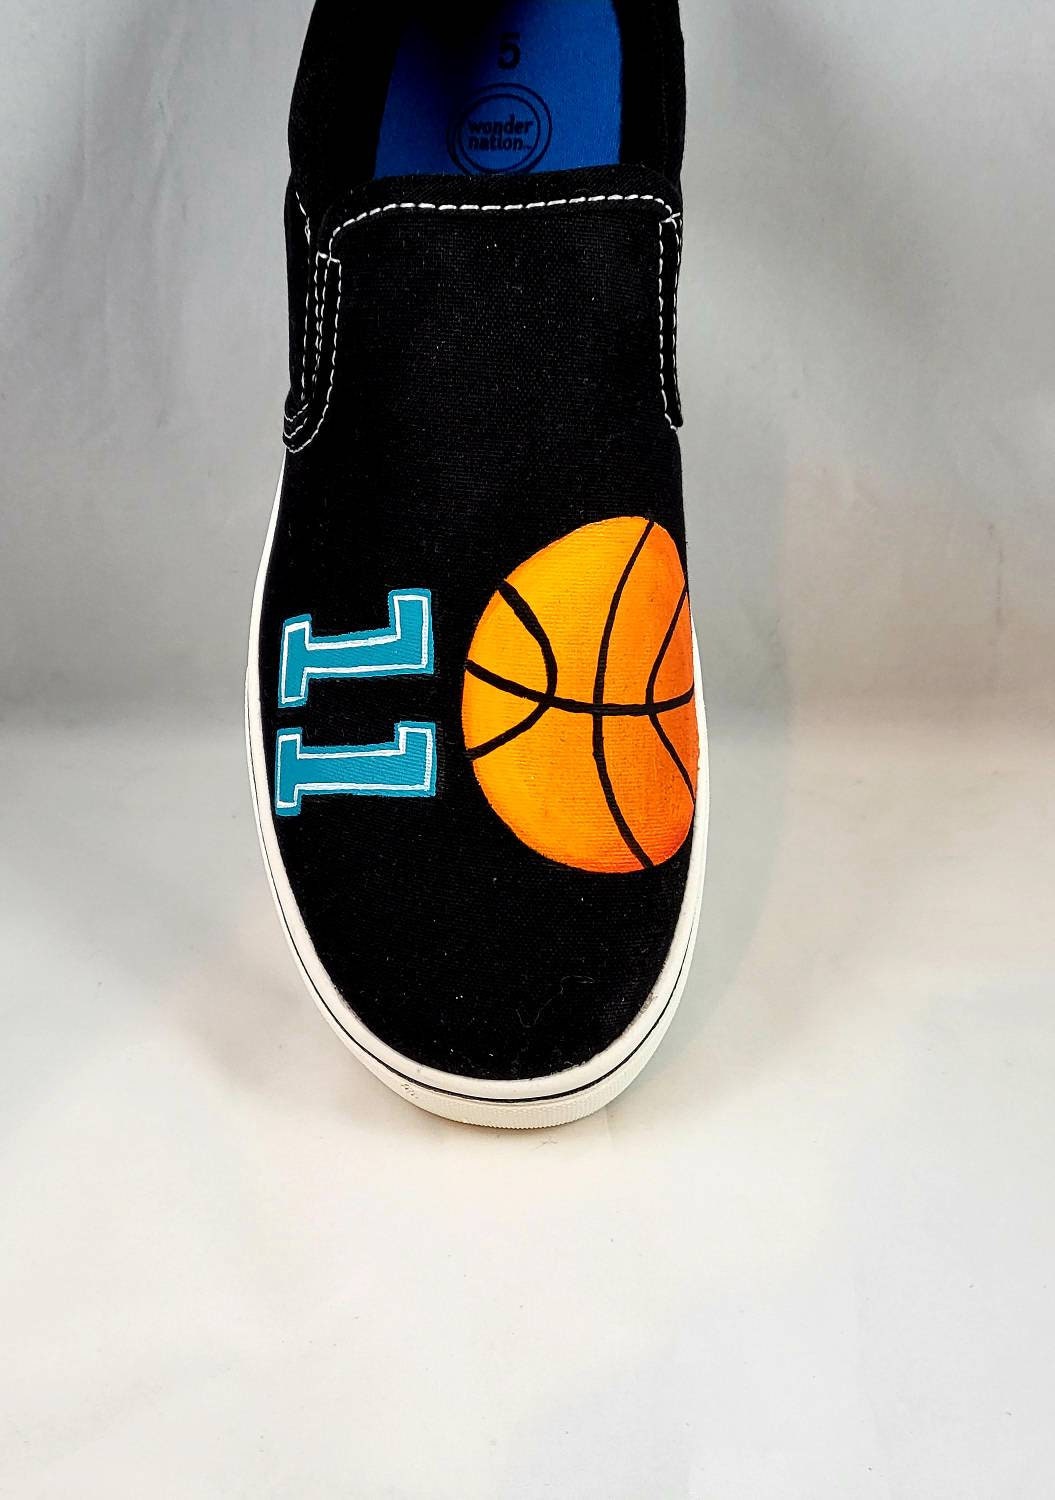 Schoenen Jongensschoenen Loafers & Instappers and women's sizes custom shoes baby HAND PAINTED basketball SHOES youth toddler child 